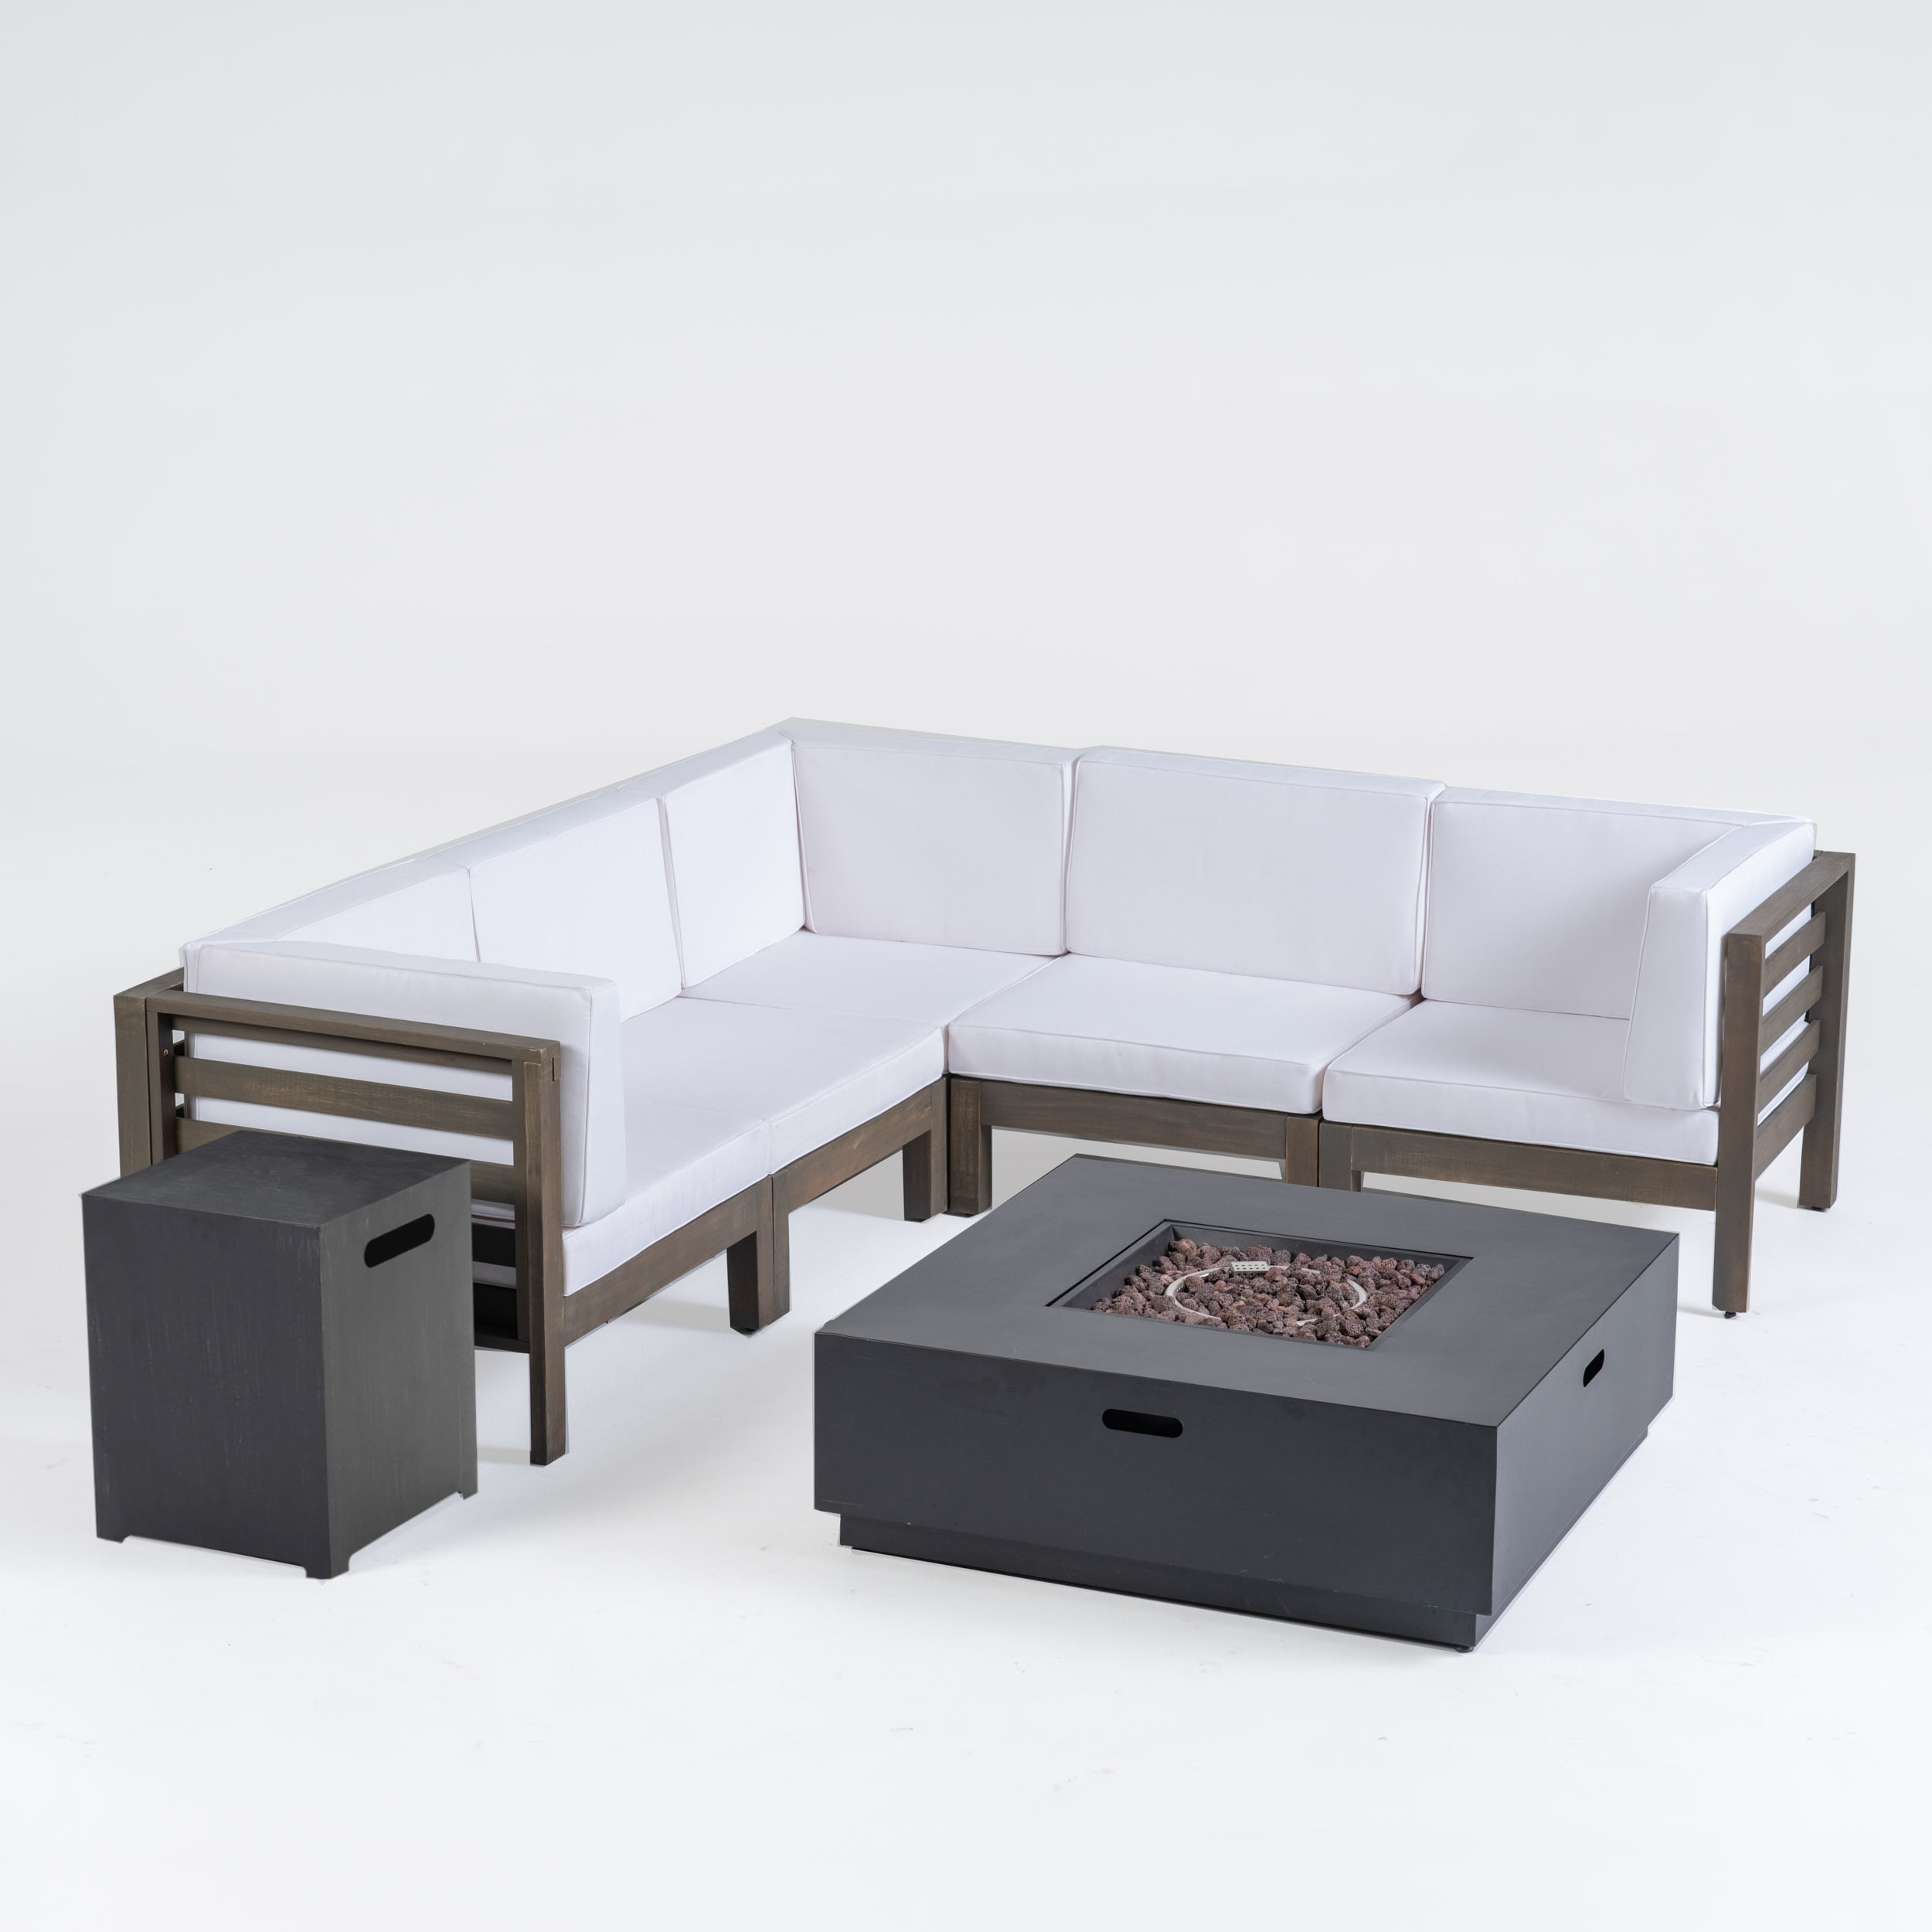 Krystin Outdoor 7 Piece V Shaped Acacia Wood Sectional Sofa Set With Fire Pit And Cushions Gray White